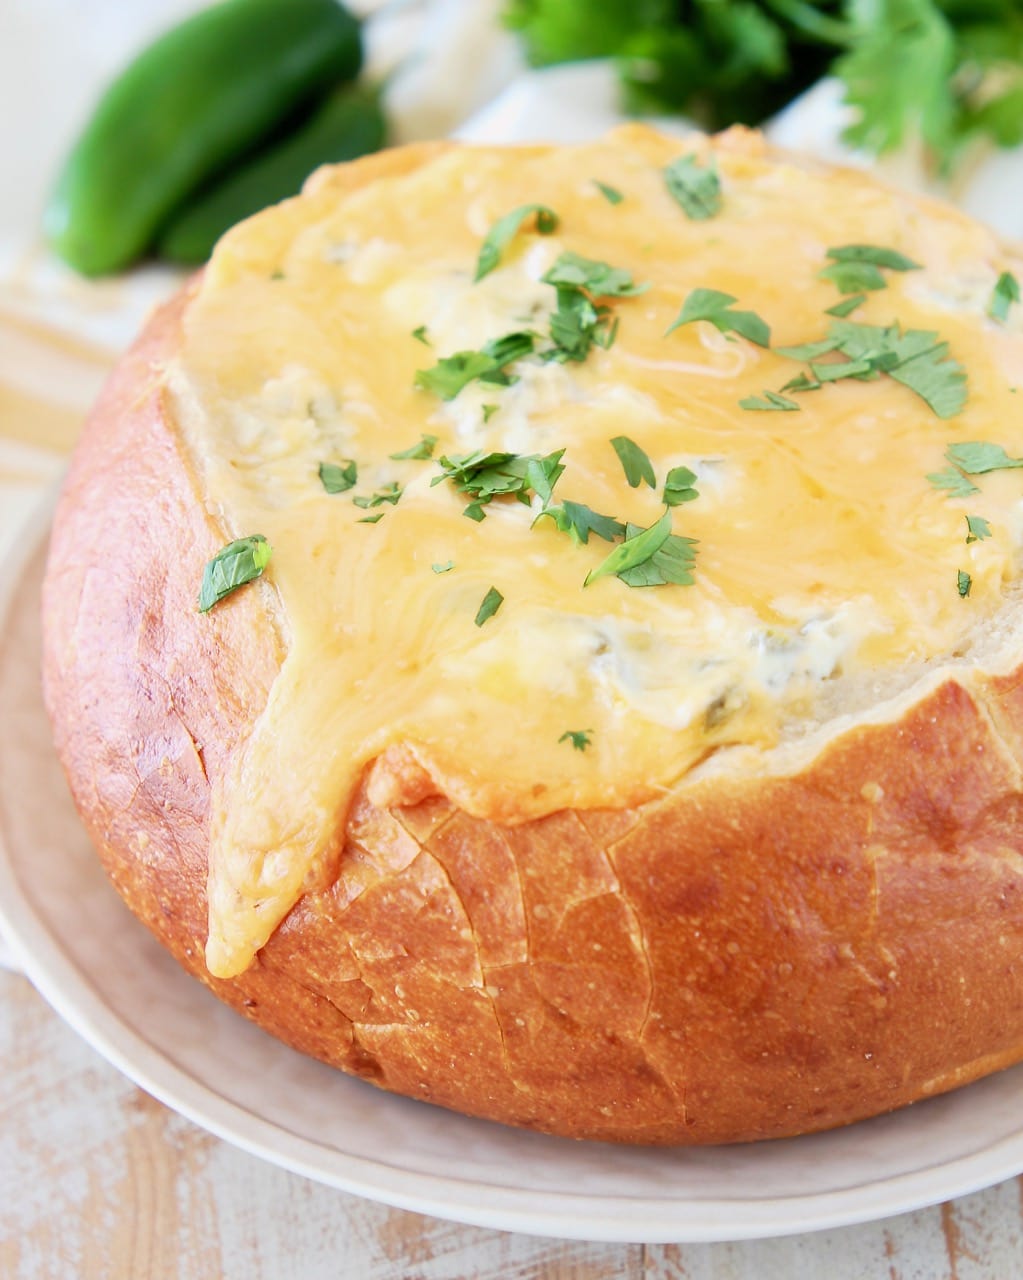 Cheesy sourdough bread bowl with fresh jalapenos and cilantro